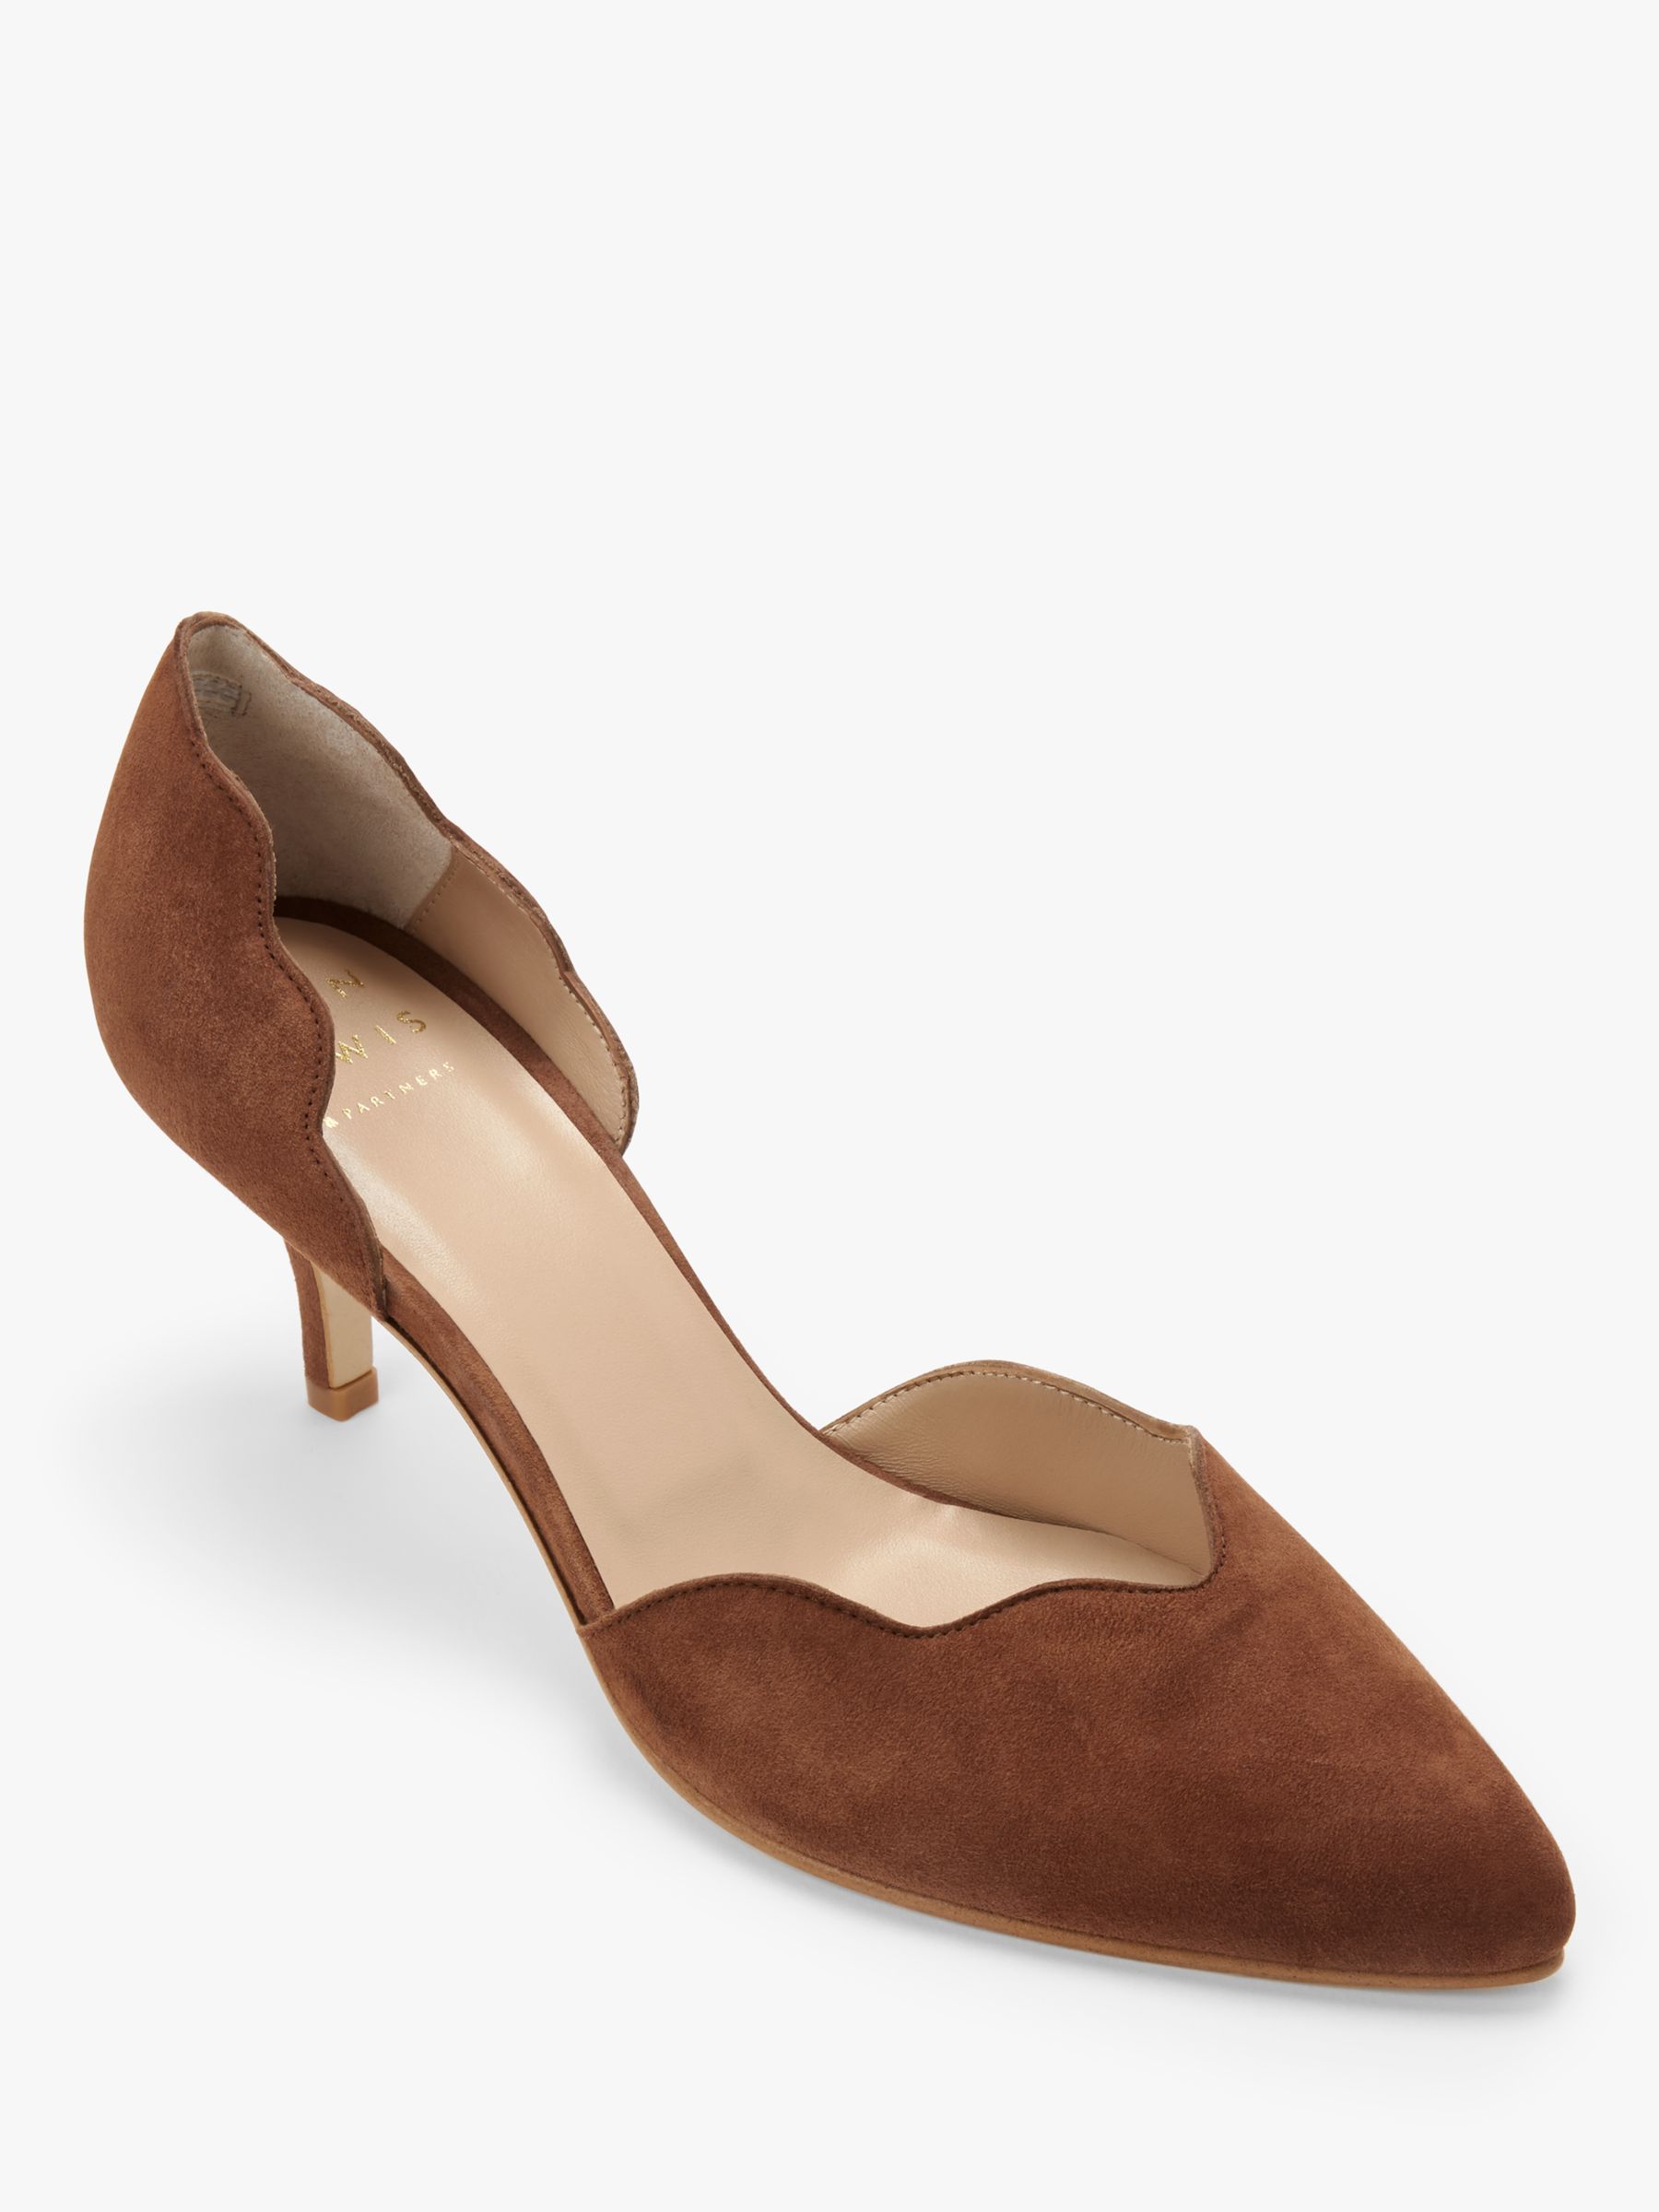 tan suede court shoes